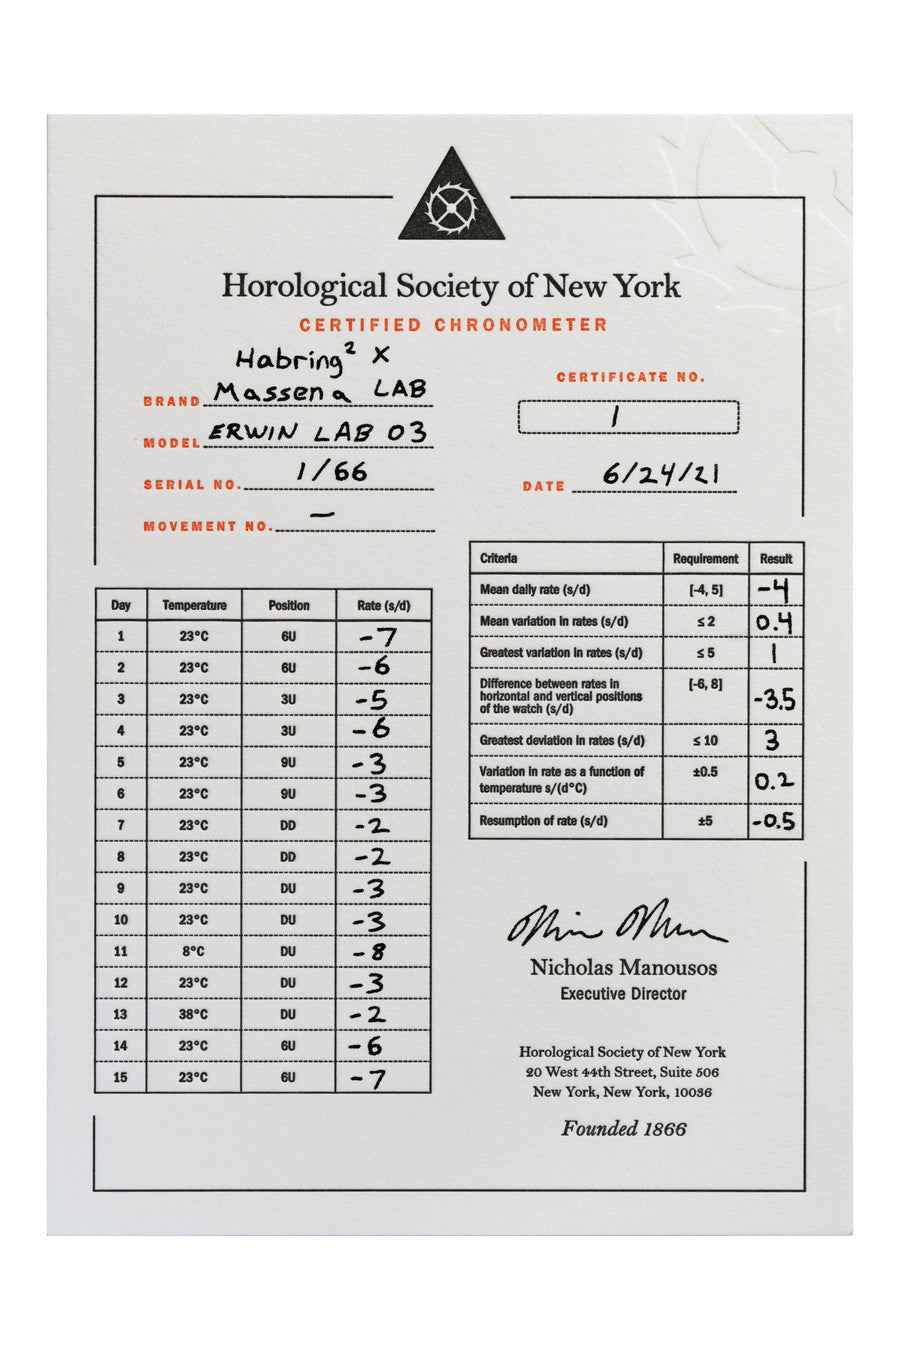 For the first time ever, the Massena LAB x Habring² ERWIN LAB03 has been tested and declared by the Horological Society of New York to be a Certified Chronometer. 